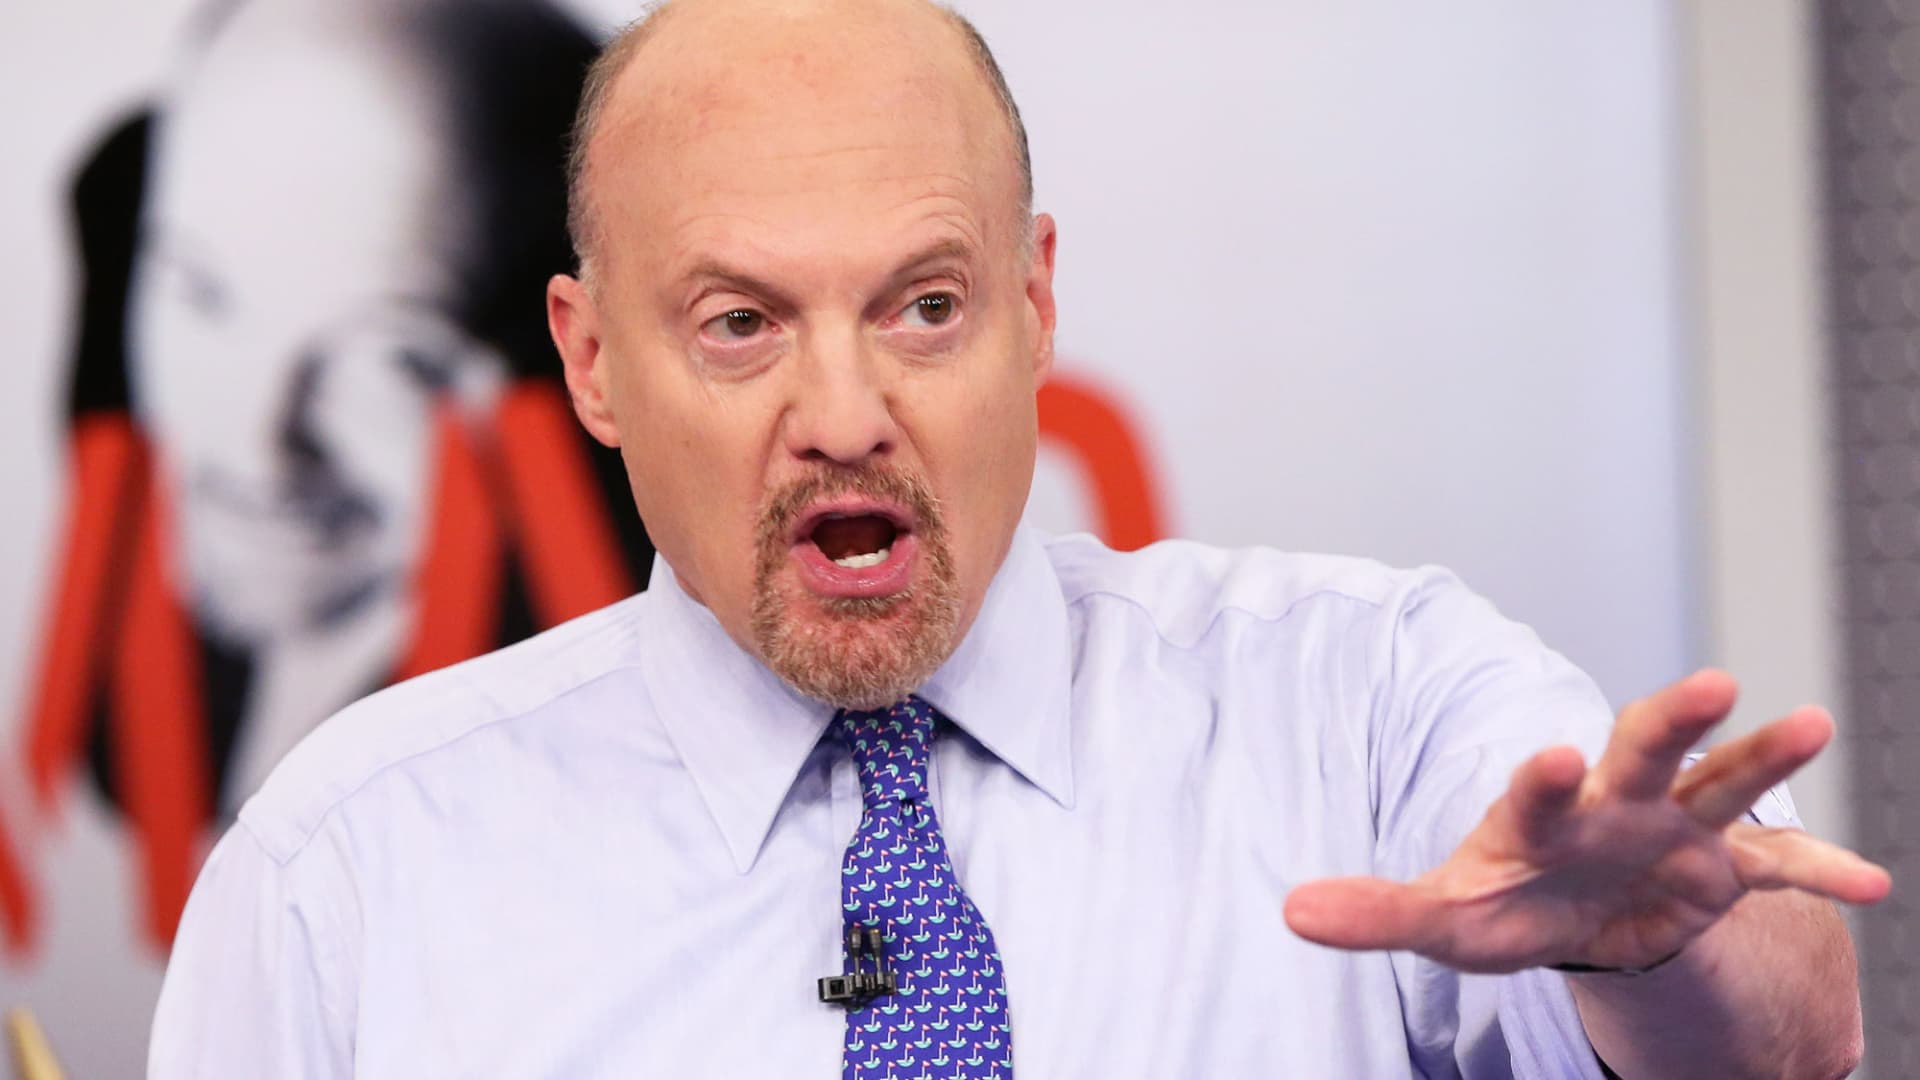 Cramer says the pull of the bond market is worrying, so keep some cash on hand